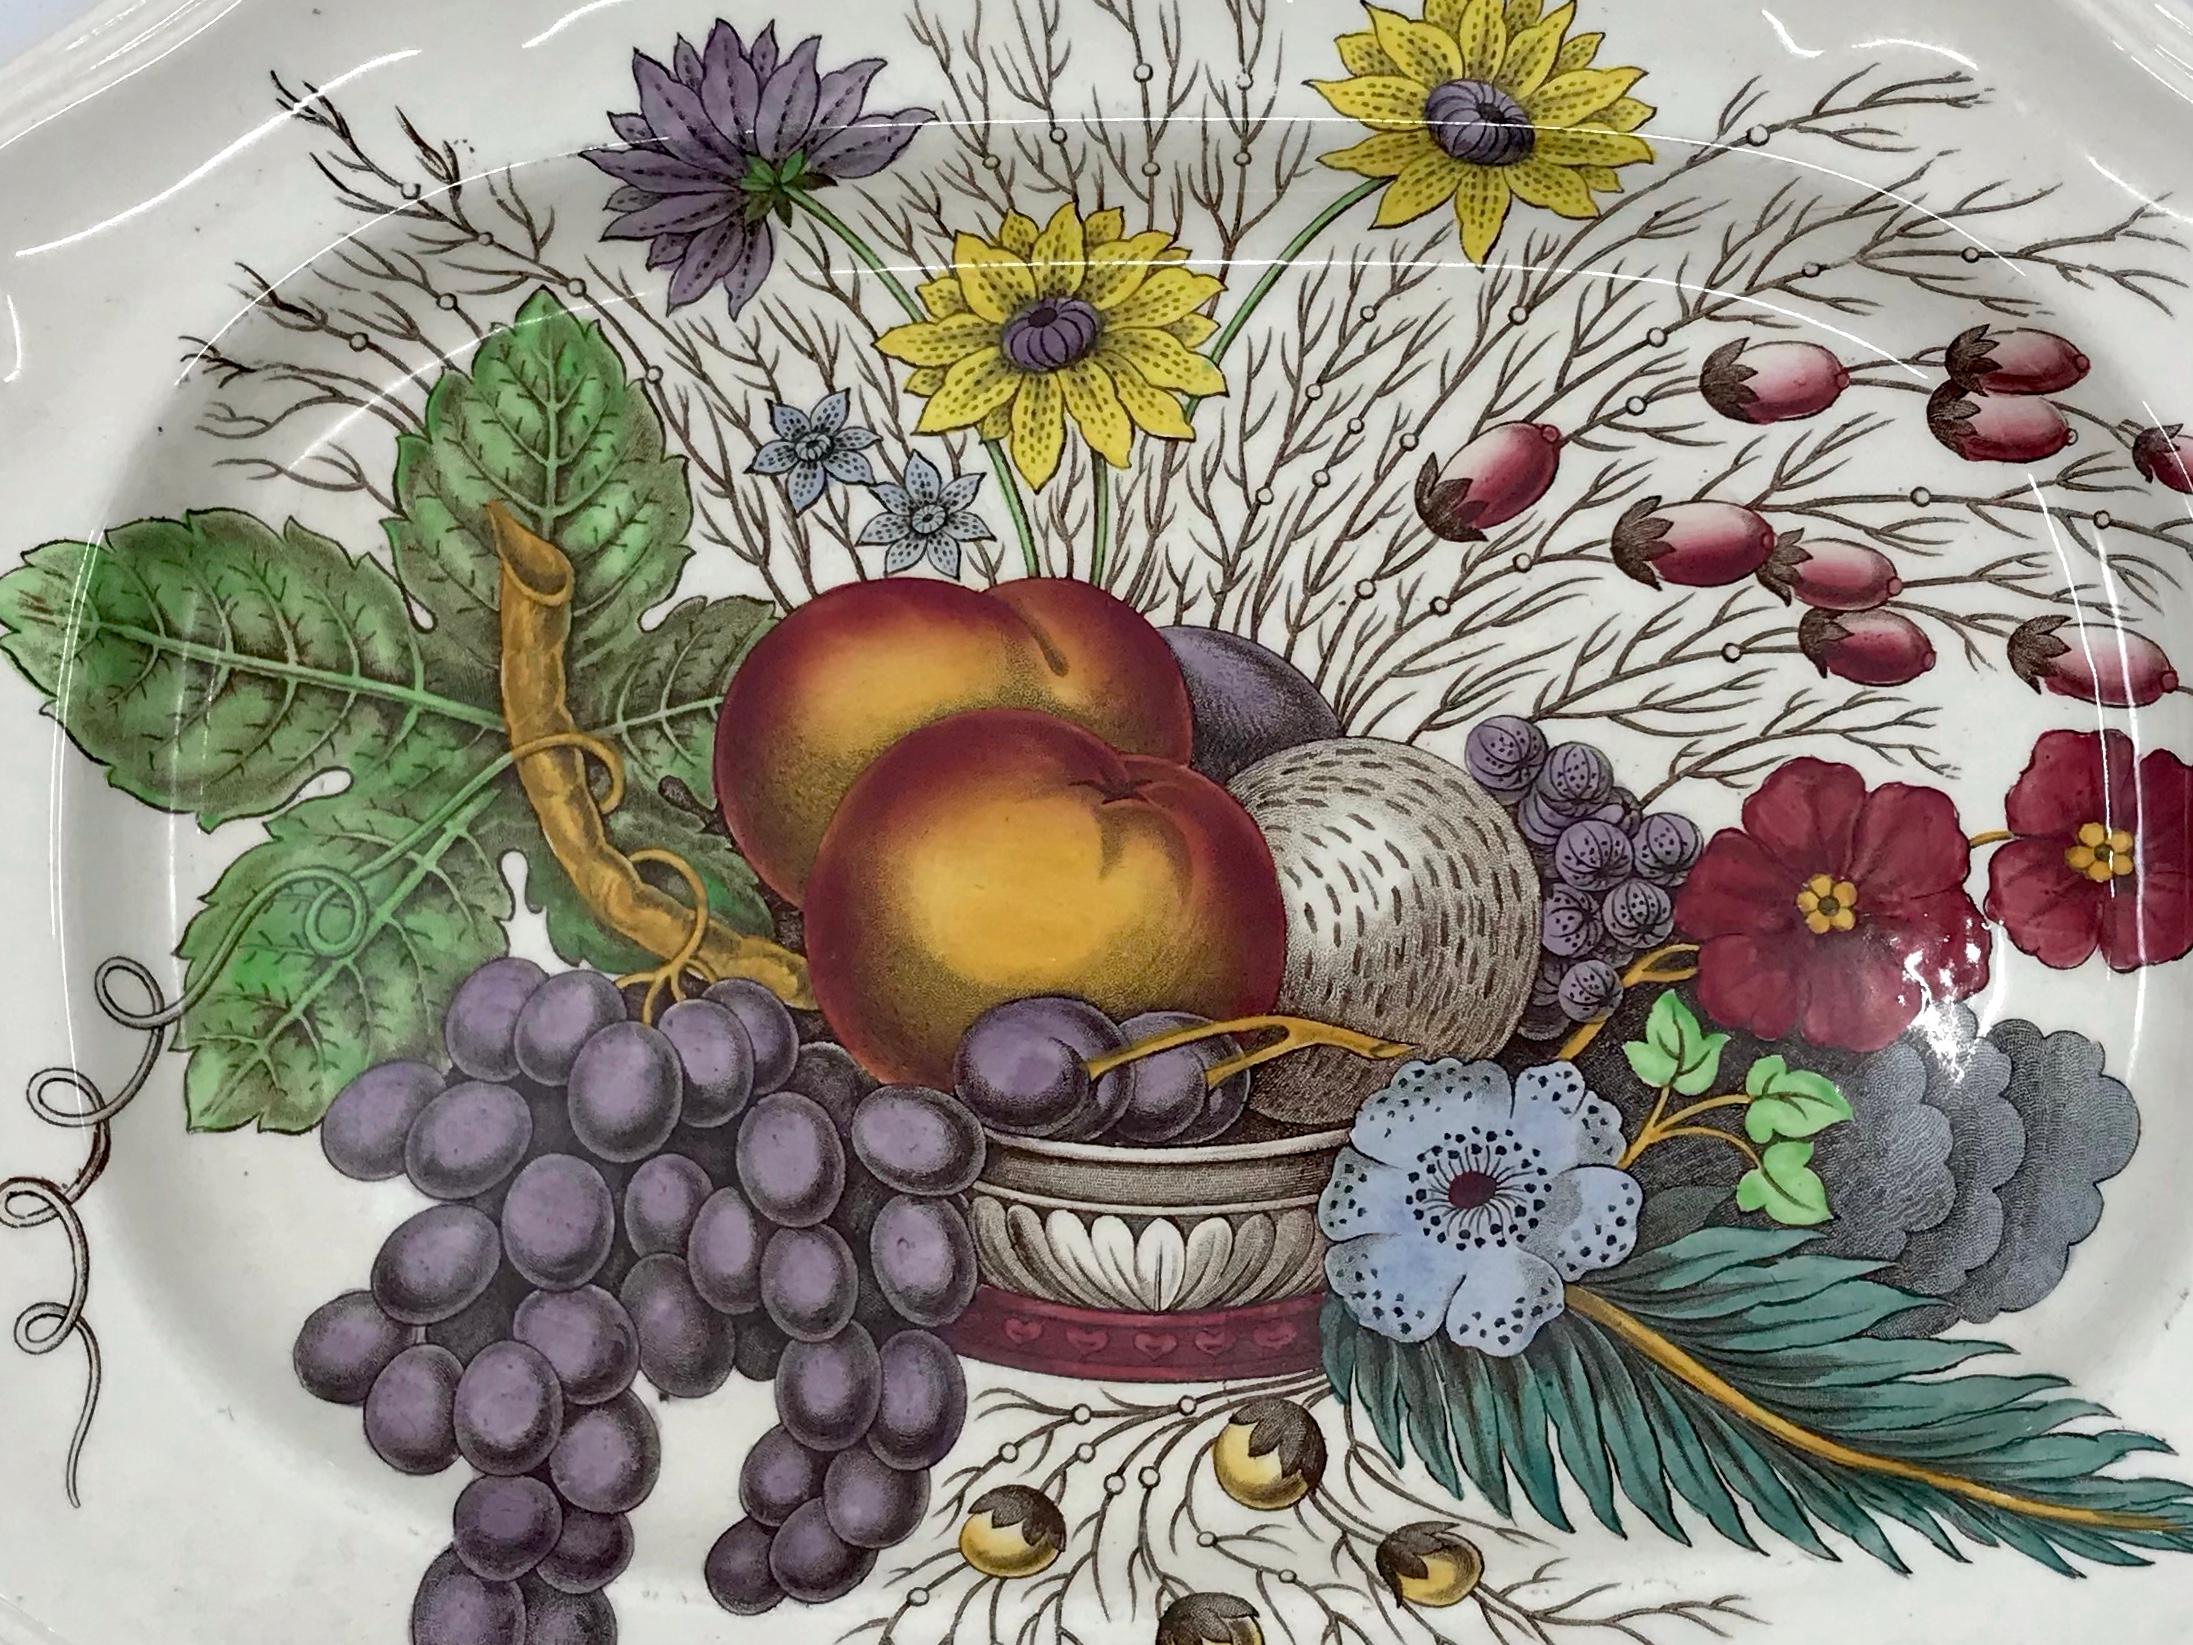 English small harvest platter. Small serving platter with fruit basket and flowers in autumnal colors with markings for Copeland Spode. England, mid 20th century. 
Dimensions: 12.25” W x 9.5